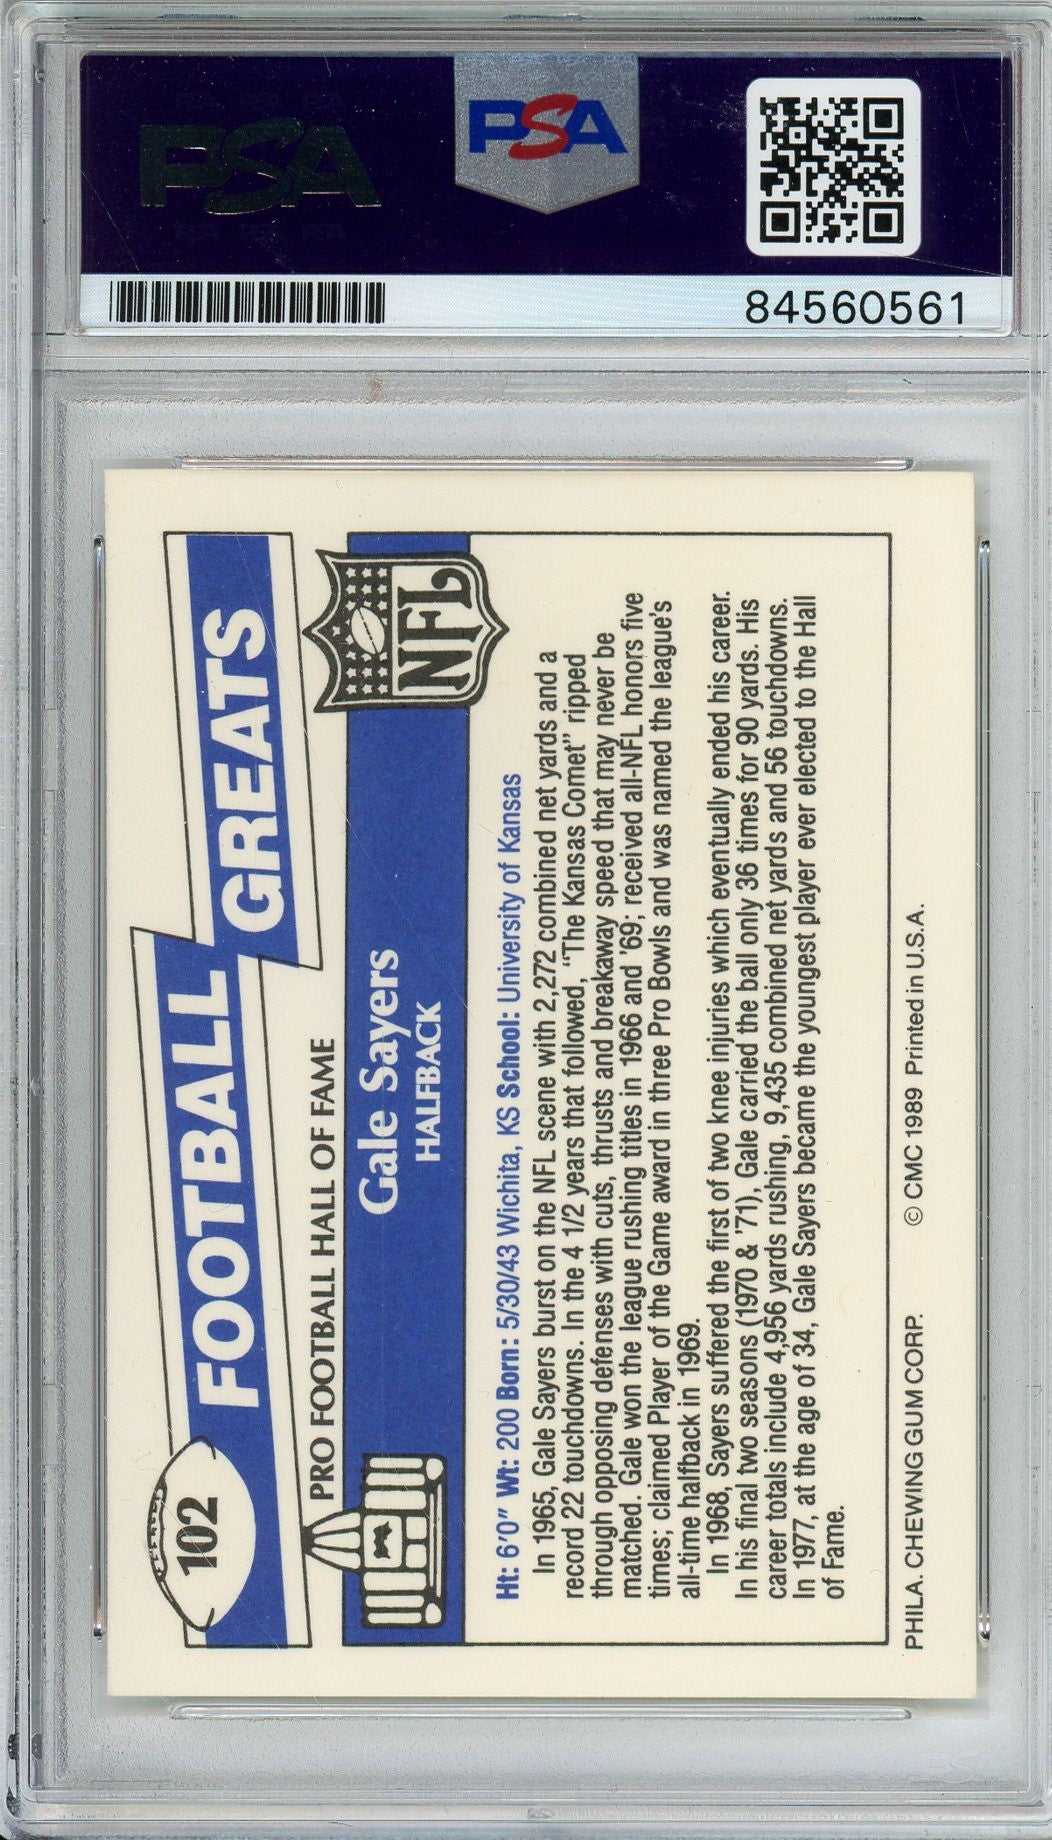 1989 SWELL FOOTBALL GREATS GALE SAYERS PSA/DNA AUTO CARD